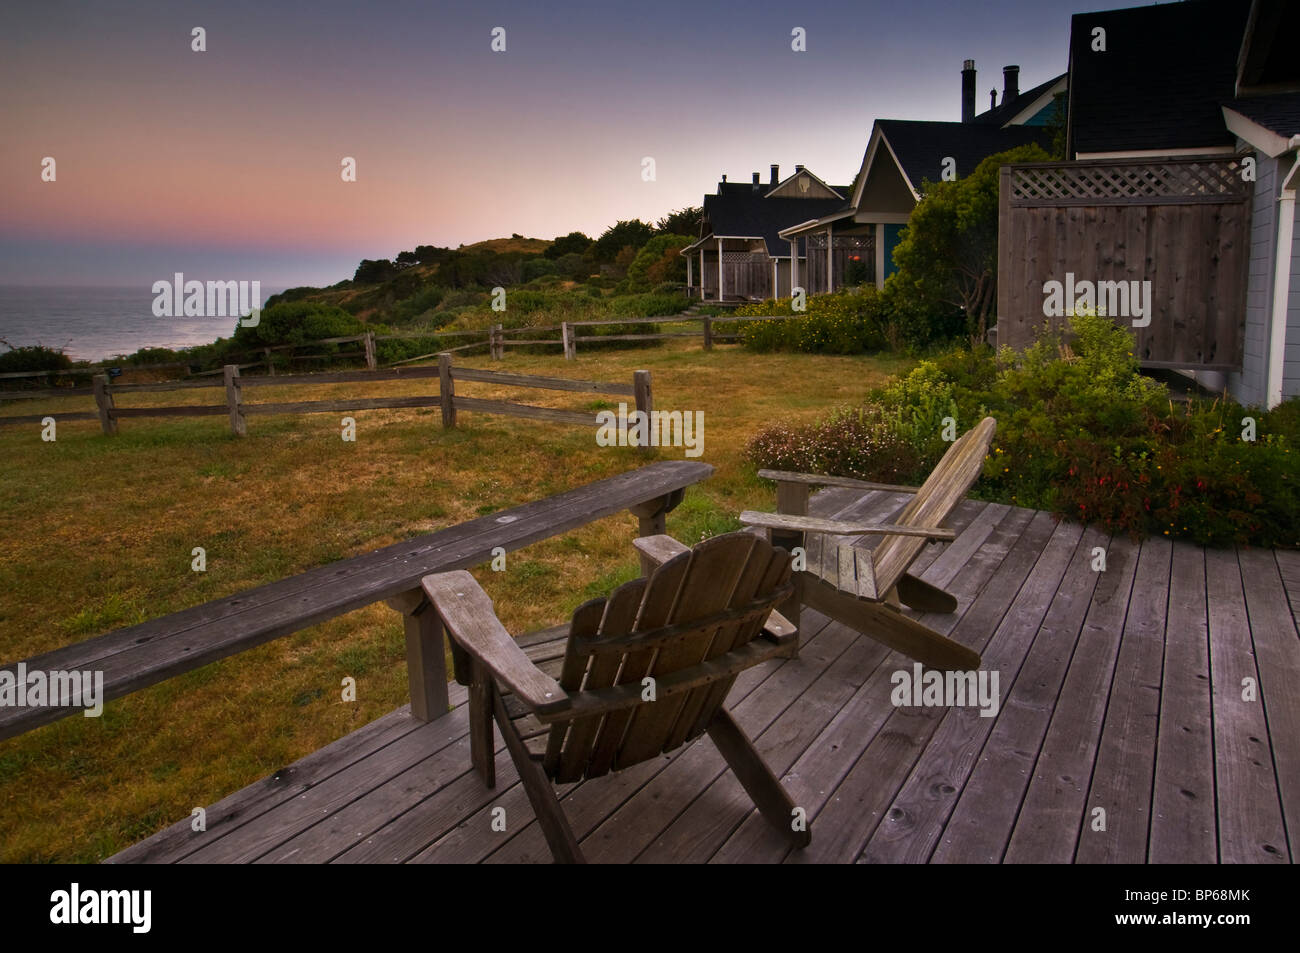 Wooden deck chairs with view of ocean from guest cottages at sunset, Albion River Inn, Albion, Mendocino County, California Stock Photo